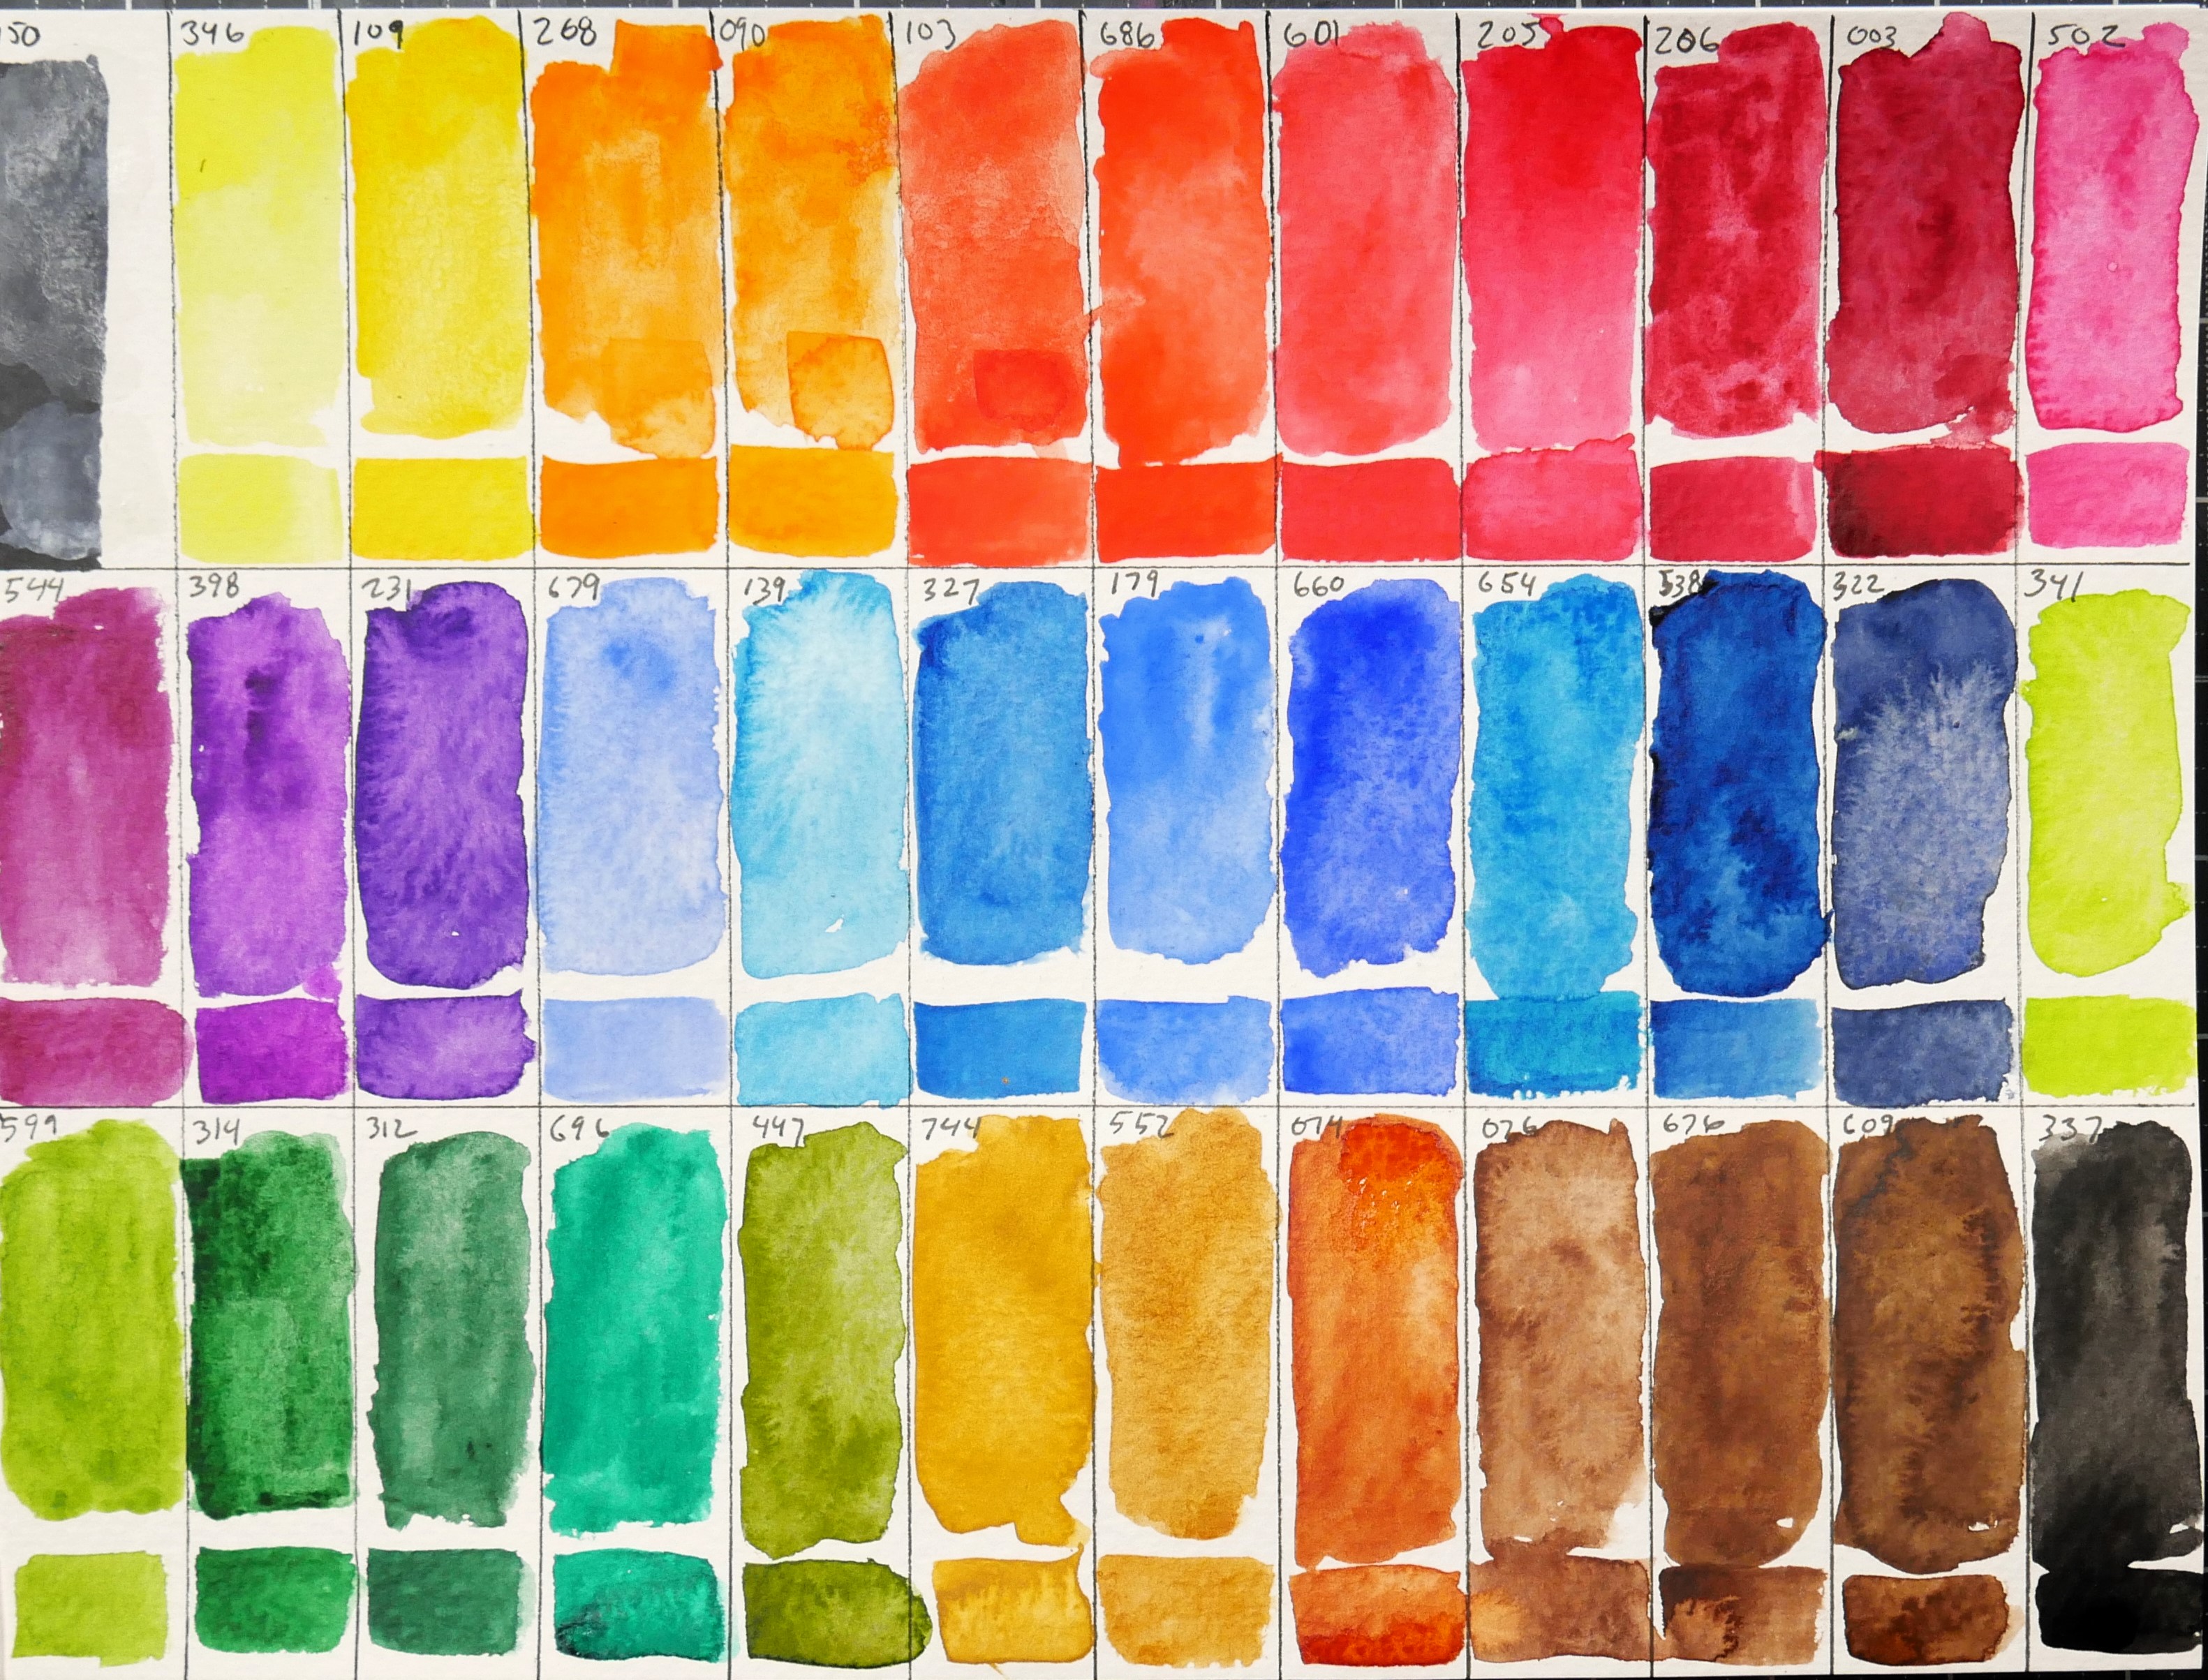 Pretty Excellent Watercolor Review, Lightfast Test, Paul Rubens 24 FUL